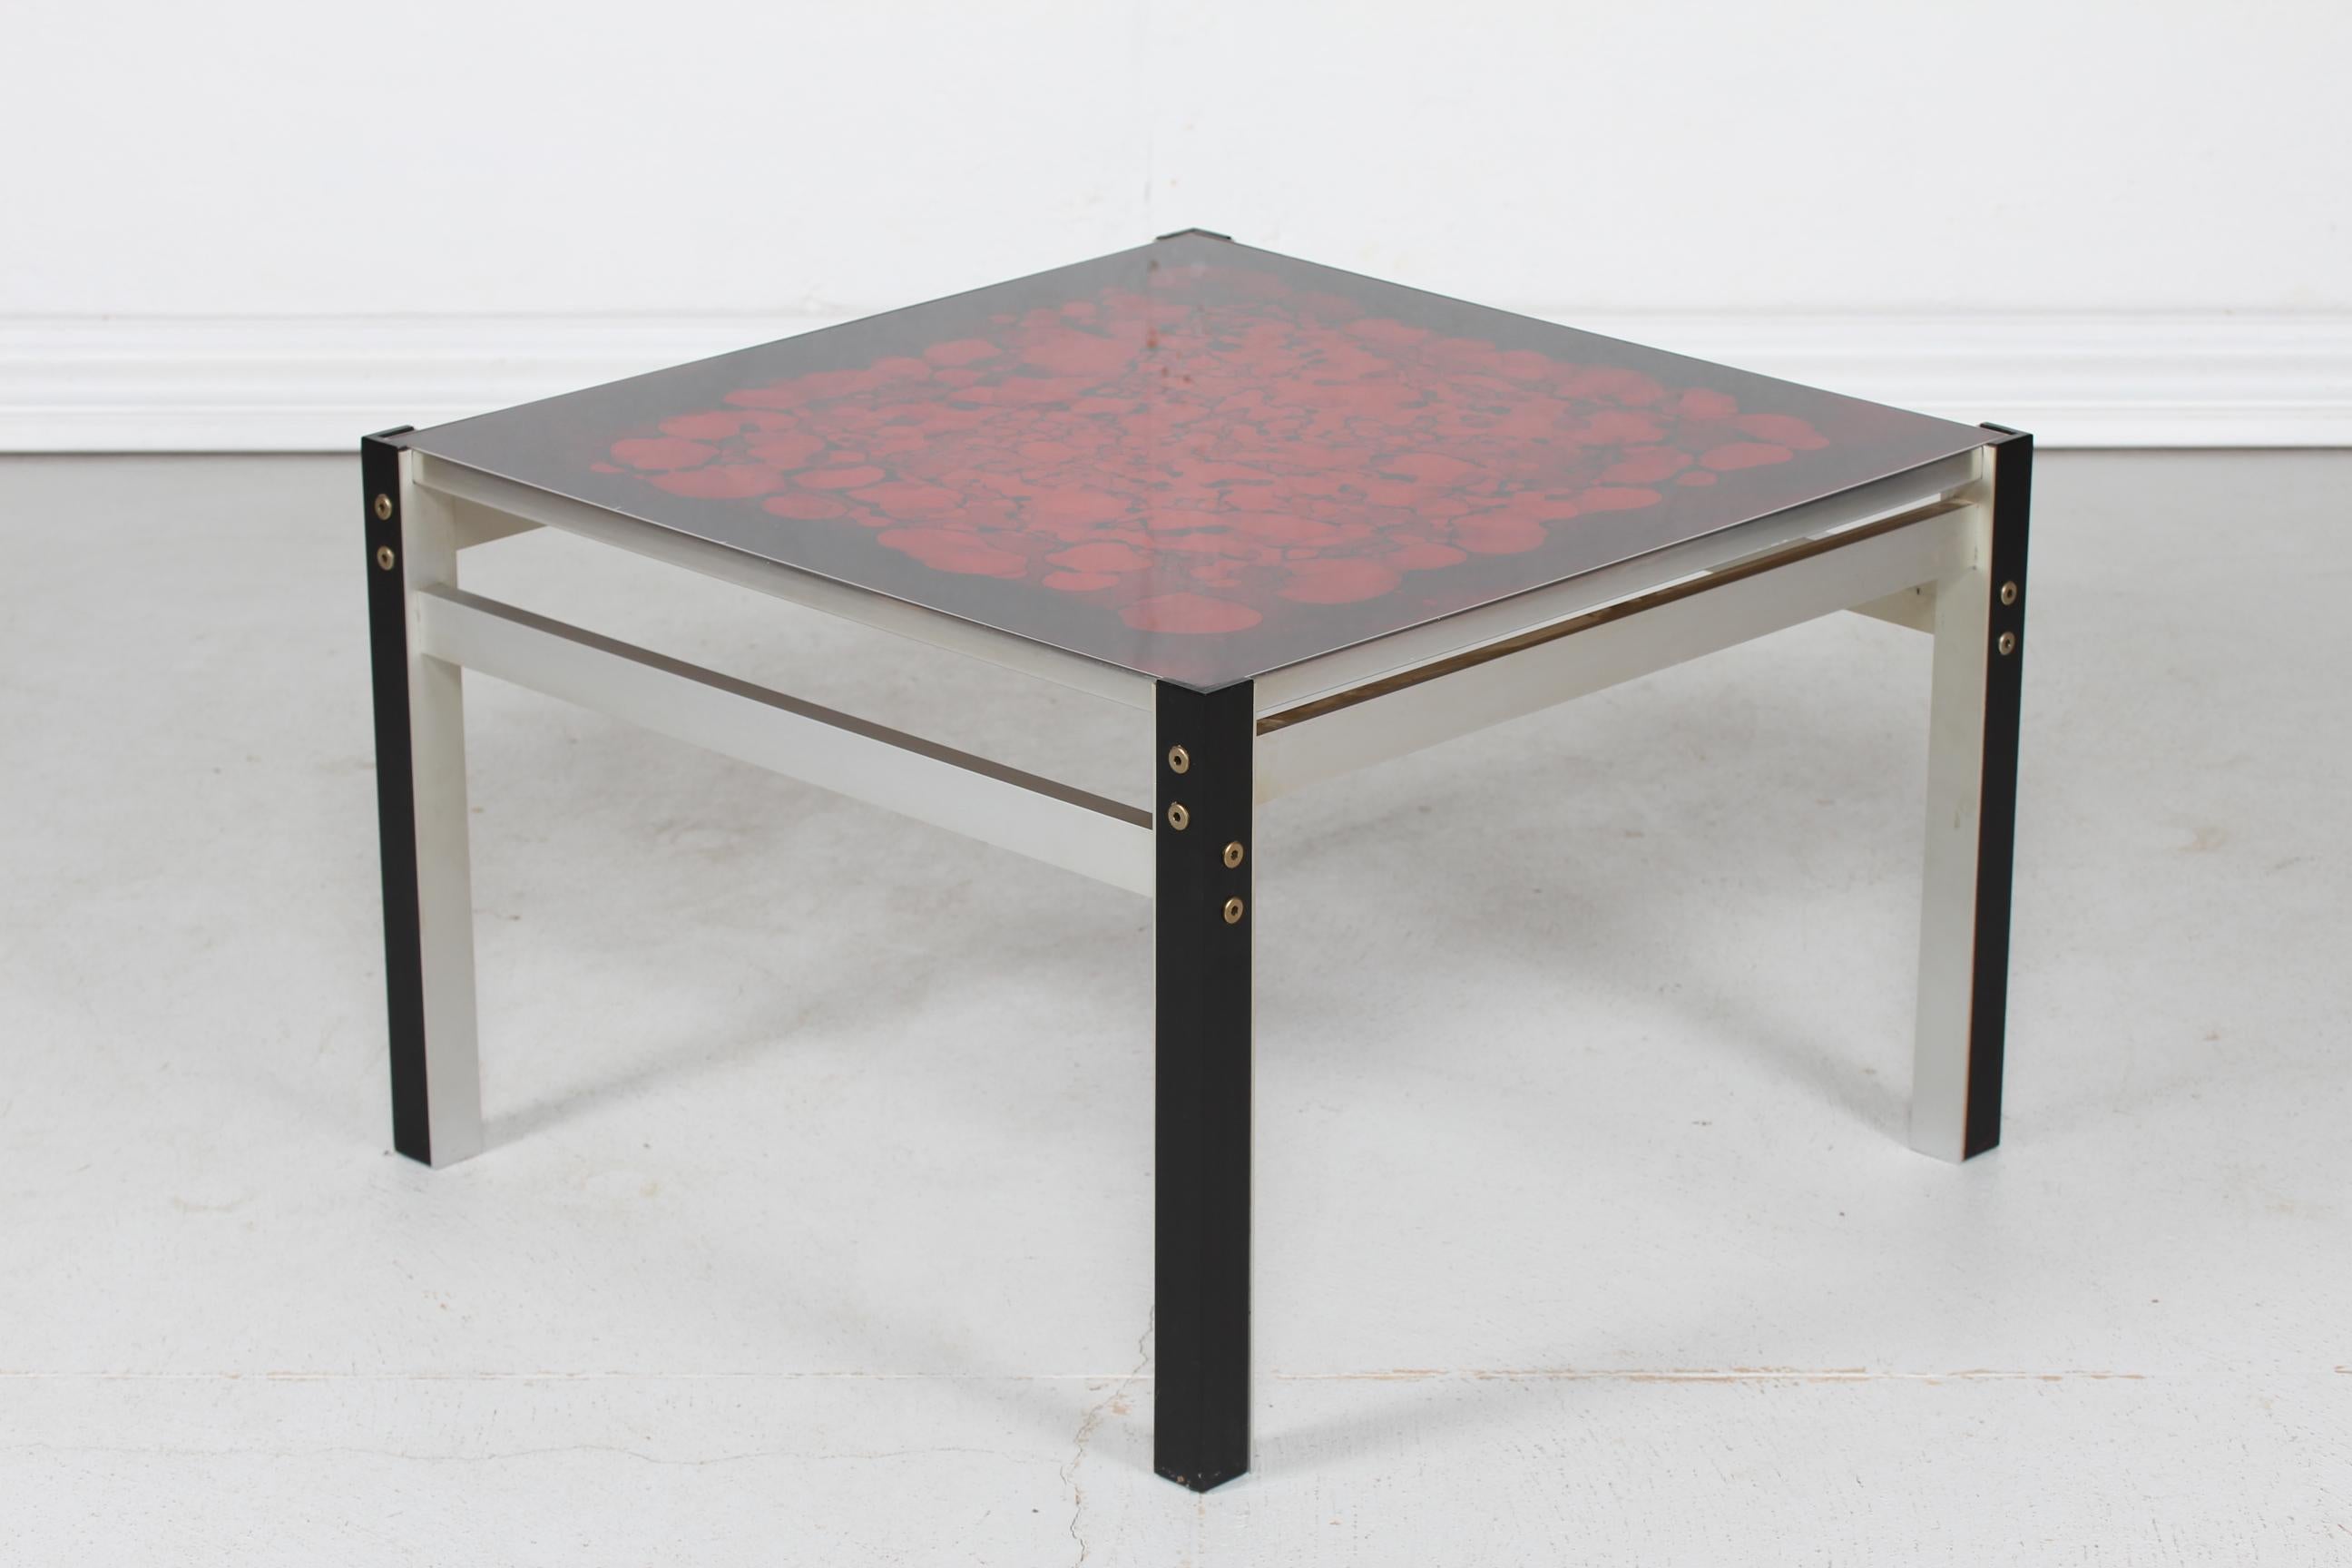 Danish modern square coffee table with red abstract decoration on the glass tabletop.
The frame and legs are made of aluminium.

A real typical 1970´s item.

Very nice vintage condition.
 